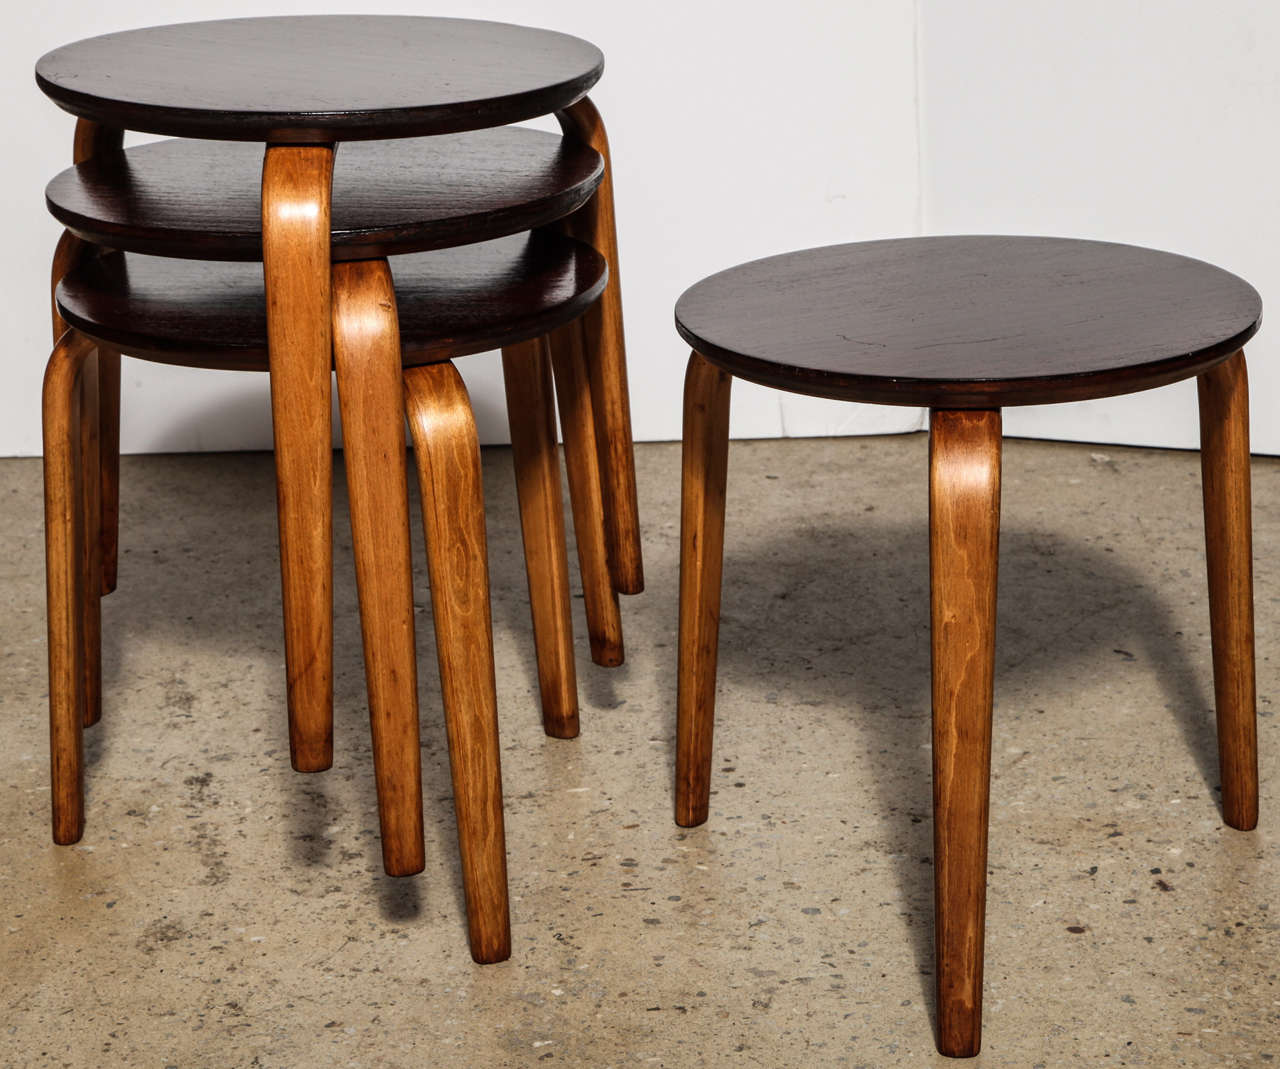 4 Mid Century Modern Stackable Tables with Mahogany Top on bent Birch legs.  Great for use as stacking Side Tables or Occasional Tables, stacking Stools or Coffee Table. Convenient use for compact, small space. Refinished